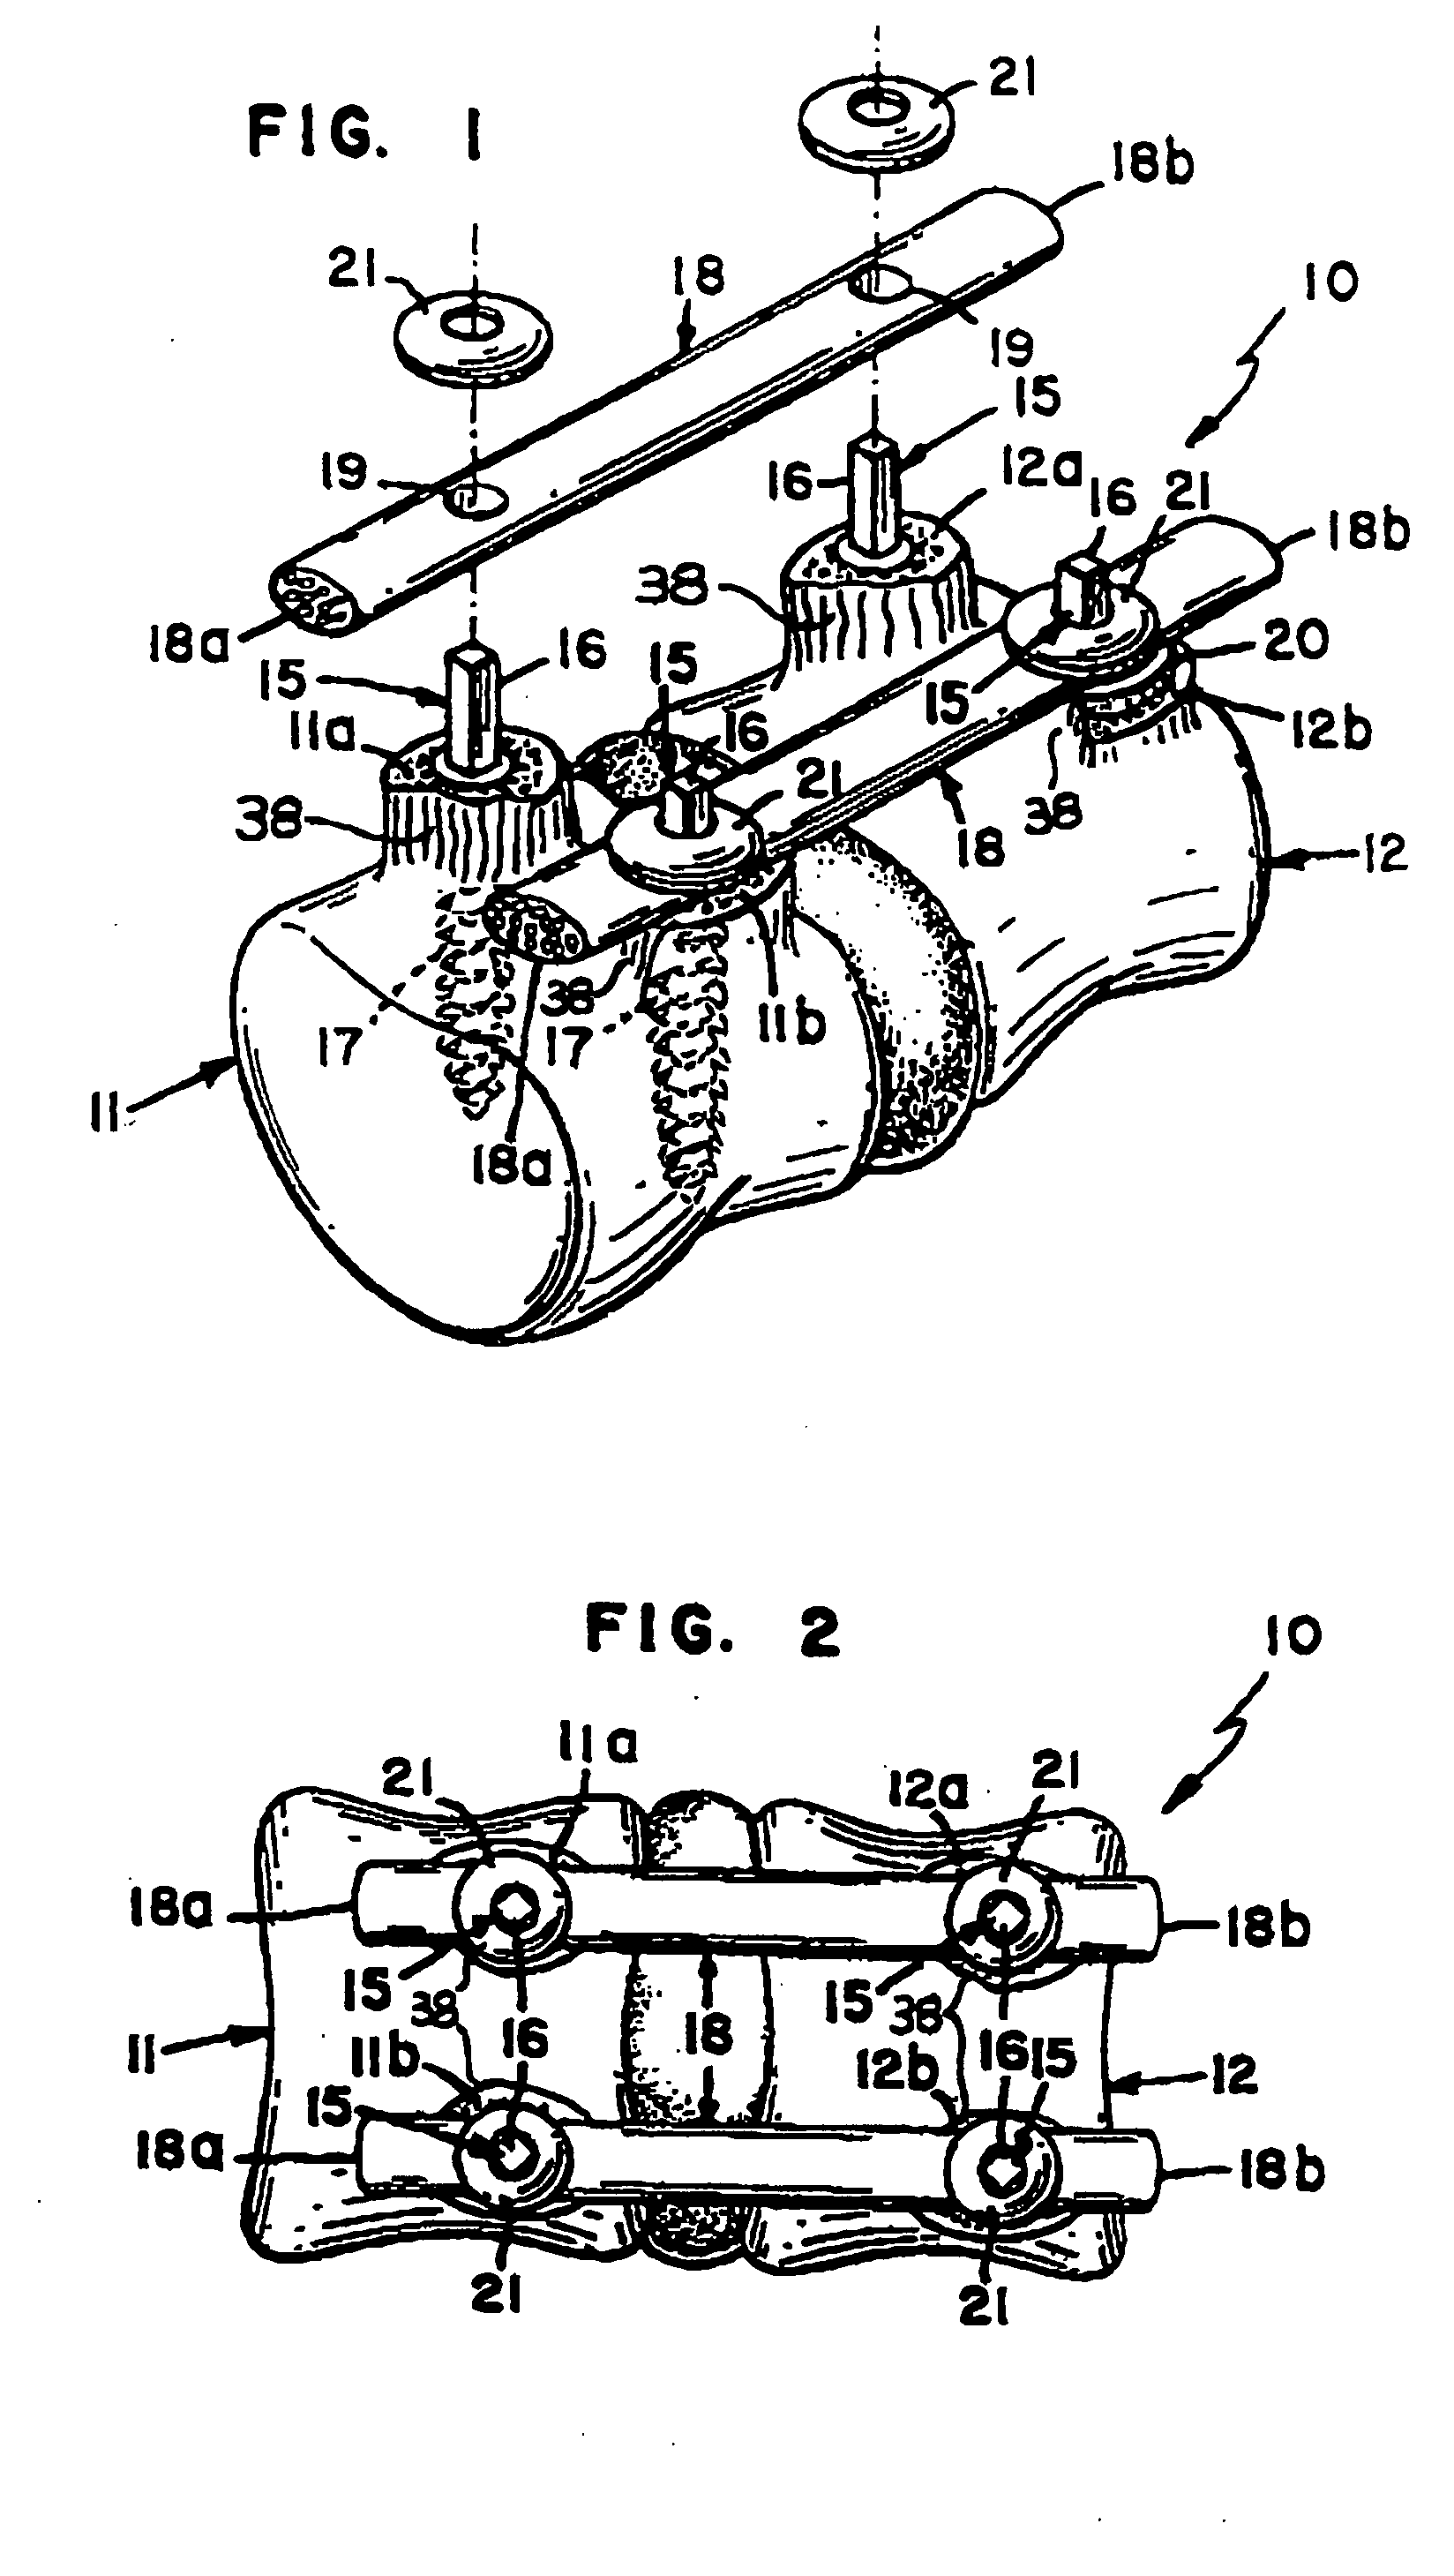 Integral flexible spine stabilization device and method